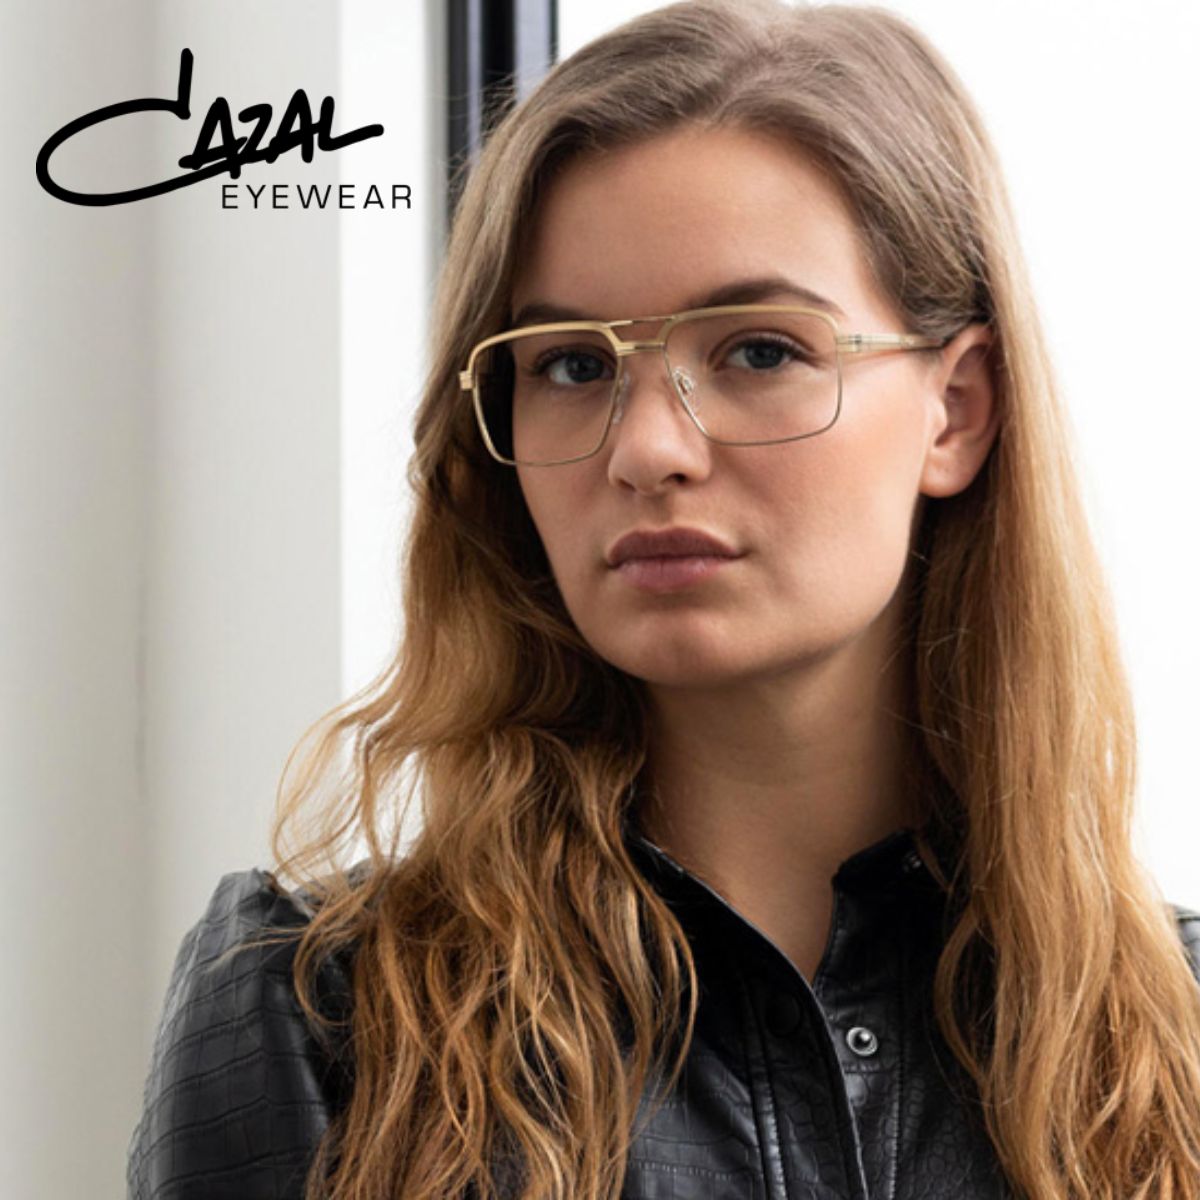 "Selection of Cazal optical frames for men and women available at Optorium, showcasing trendy and high-quality eyeglasses."